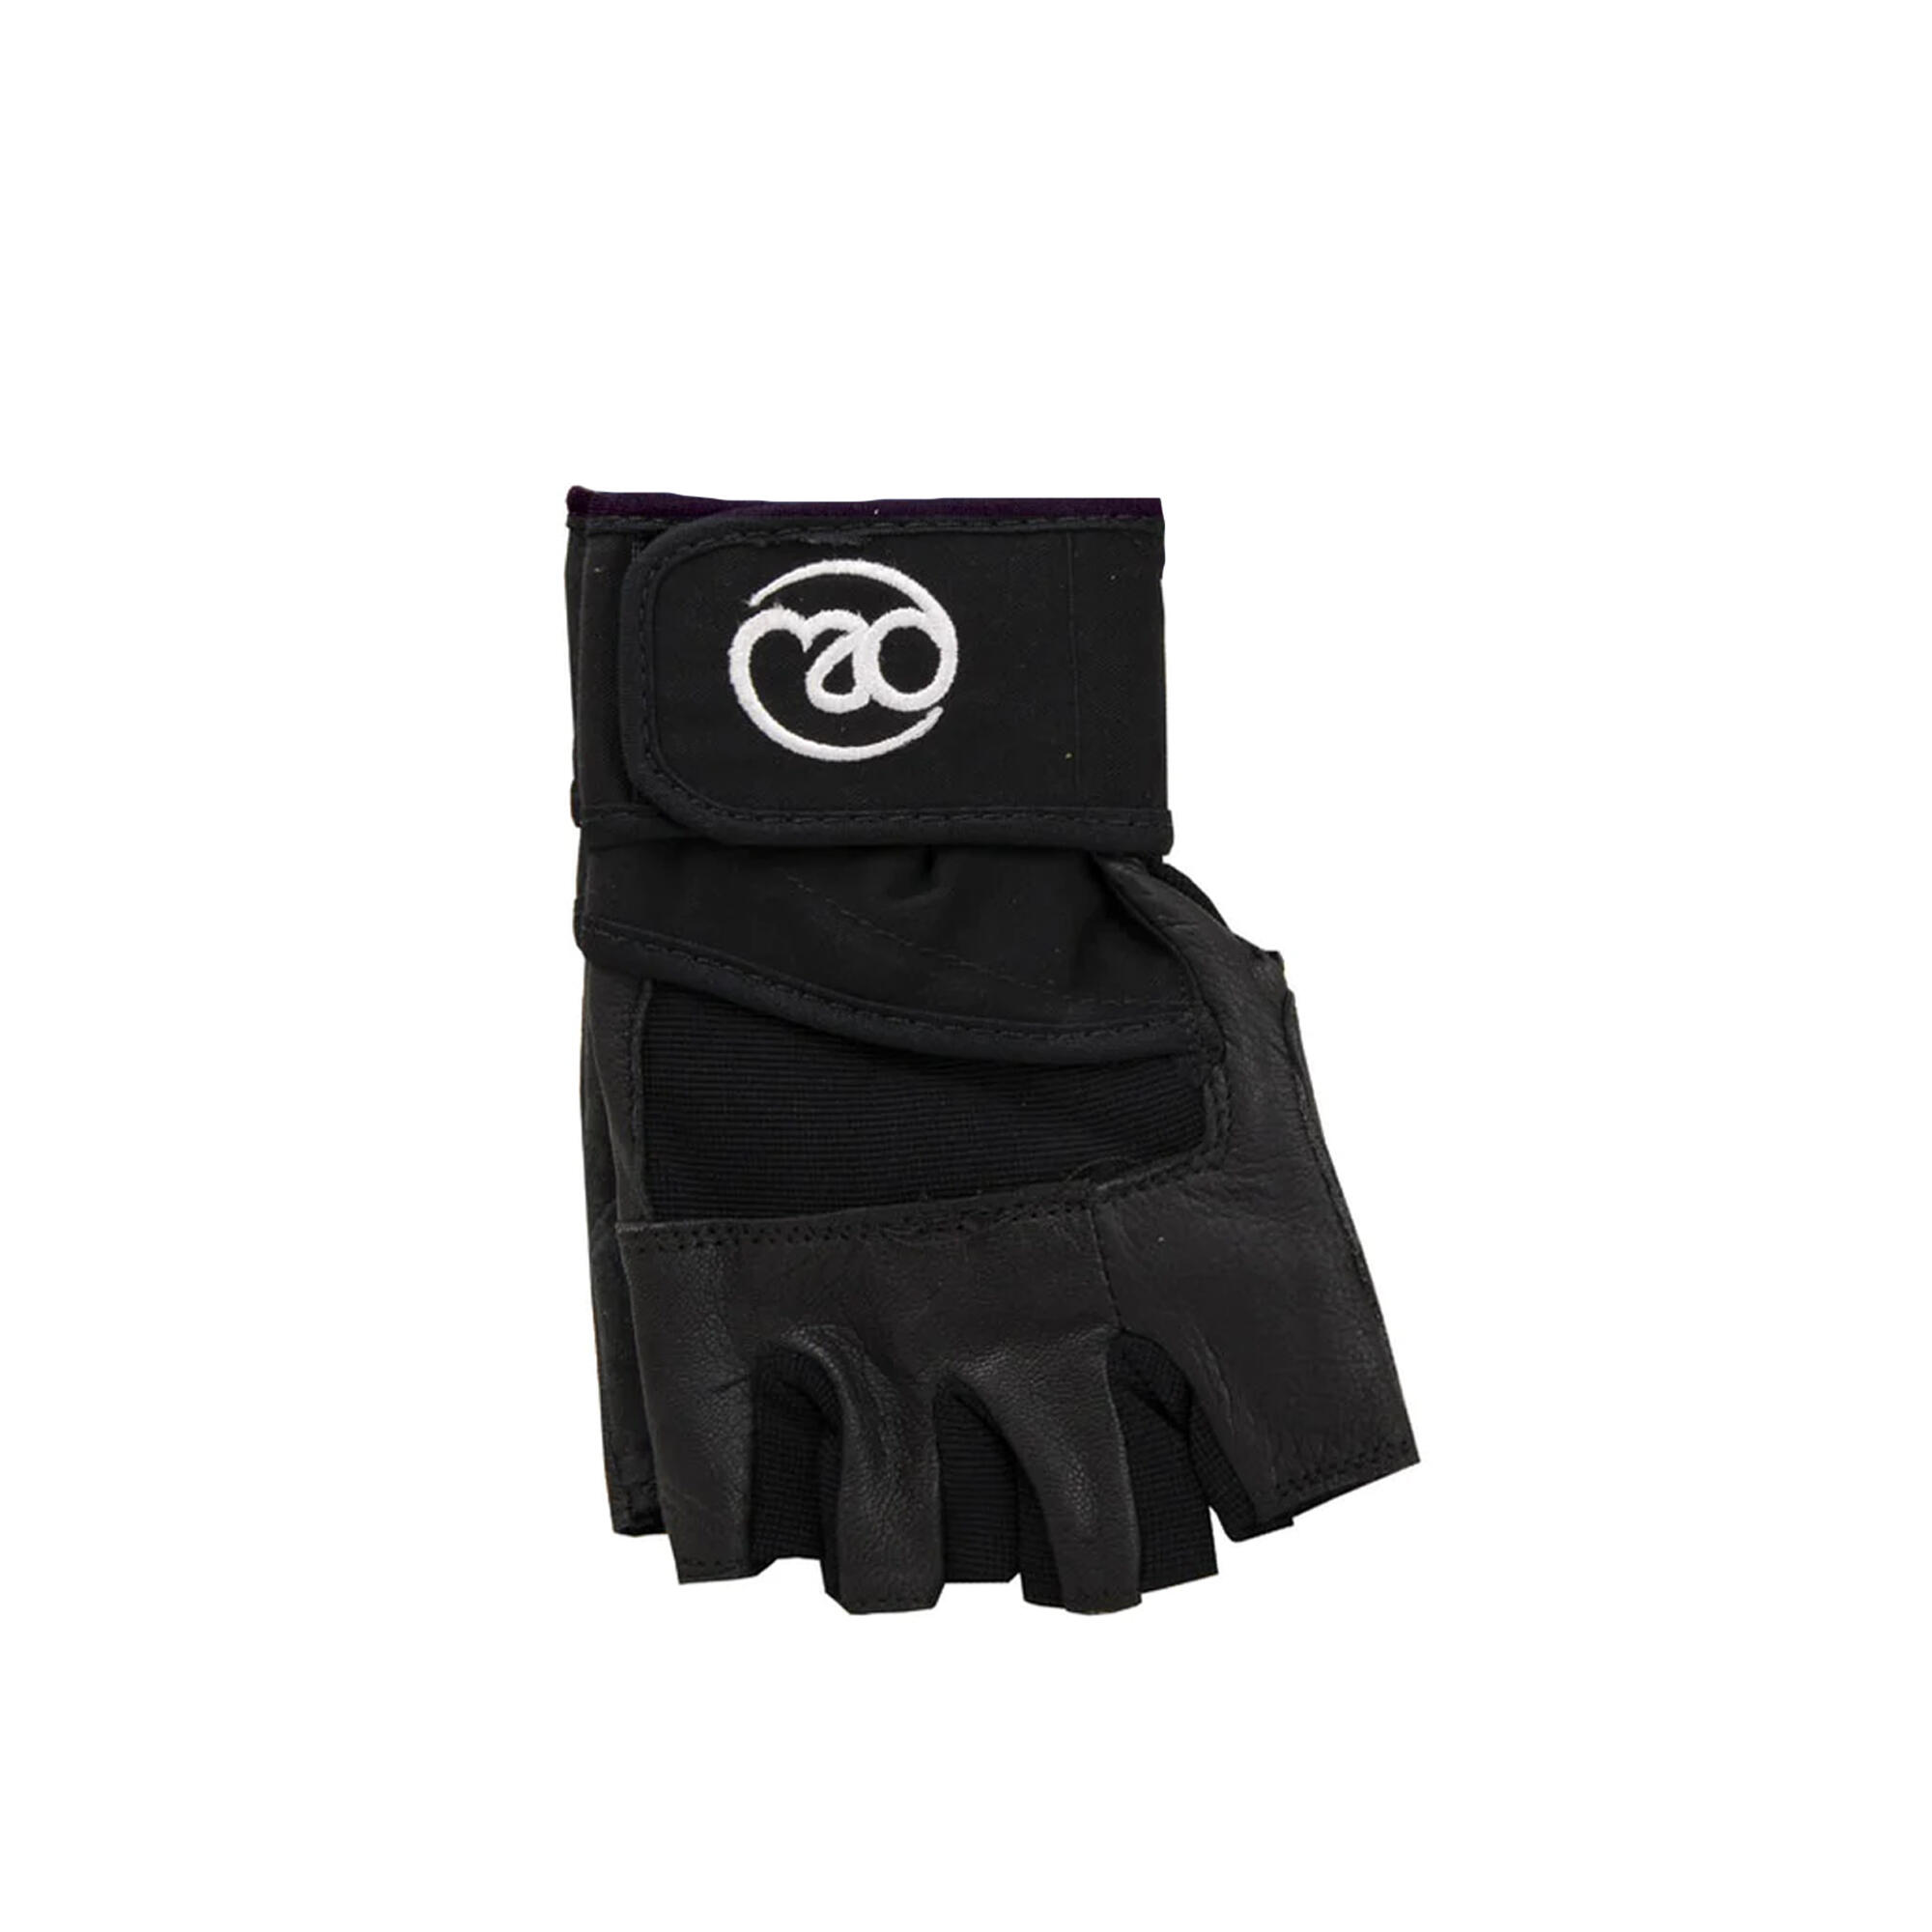 FITNESS-MAD Suede Training Gloves (Black)